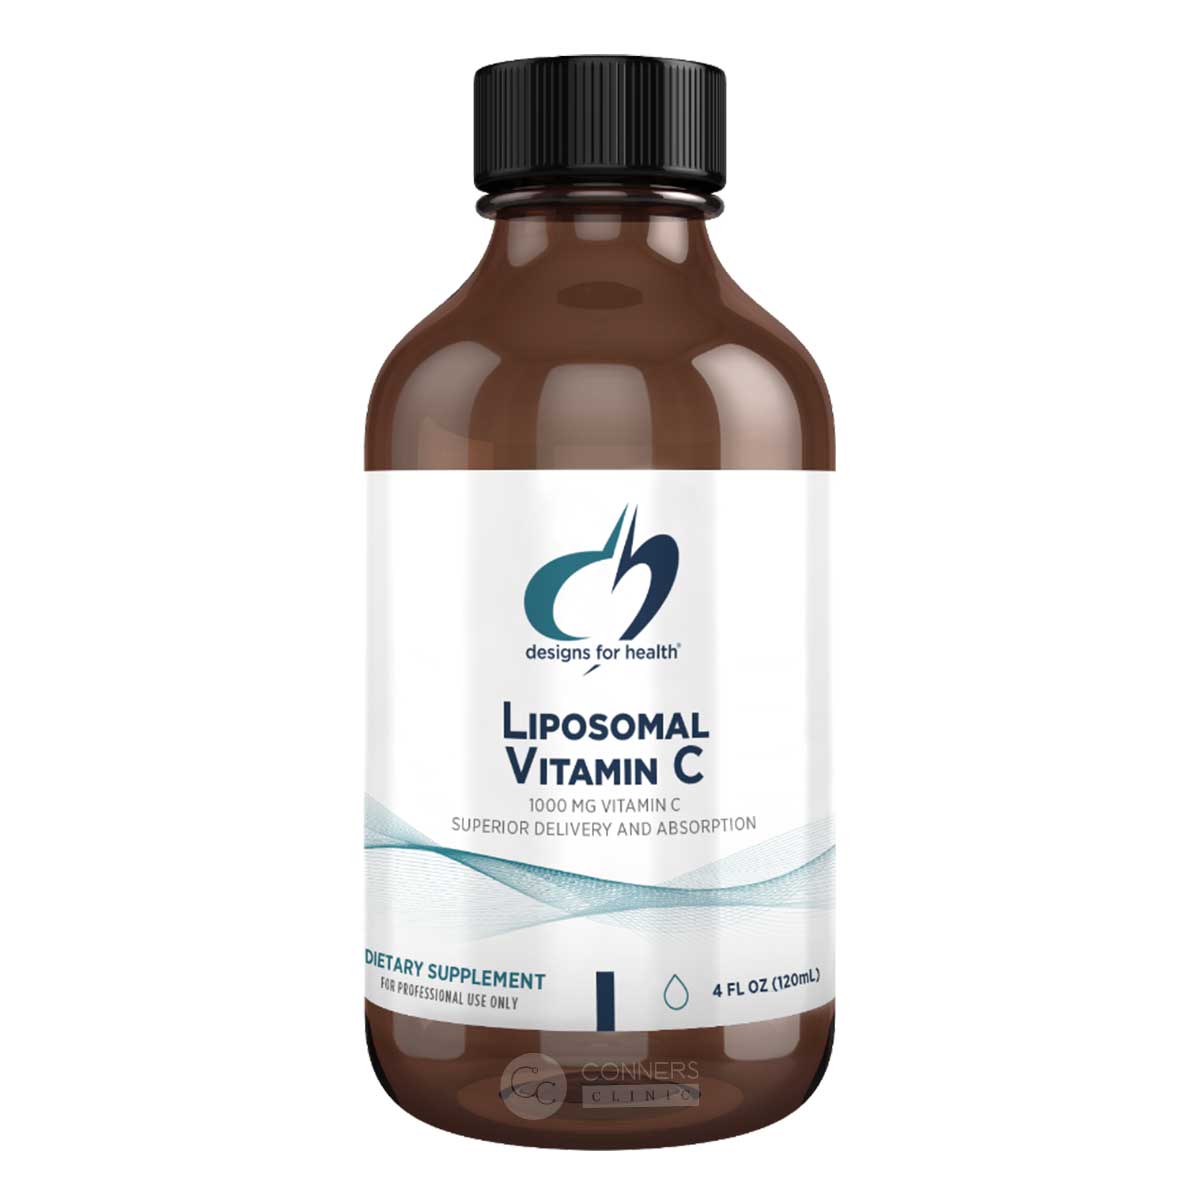 Liposomal Vitamin C - Best Designs for Health Supplement - Conners Clinic